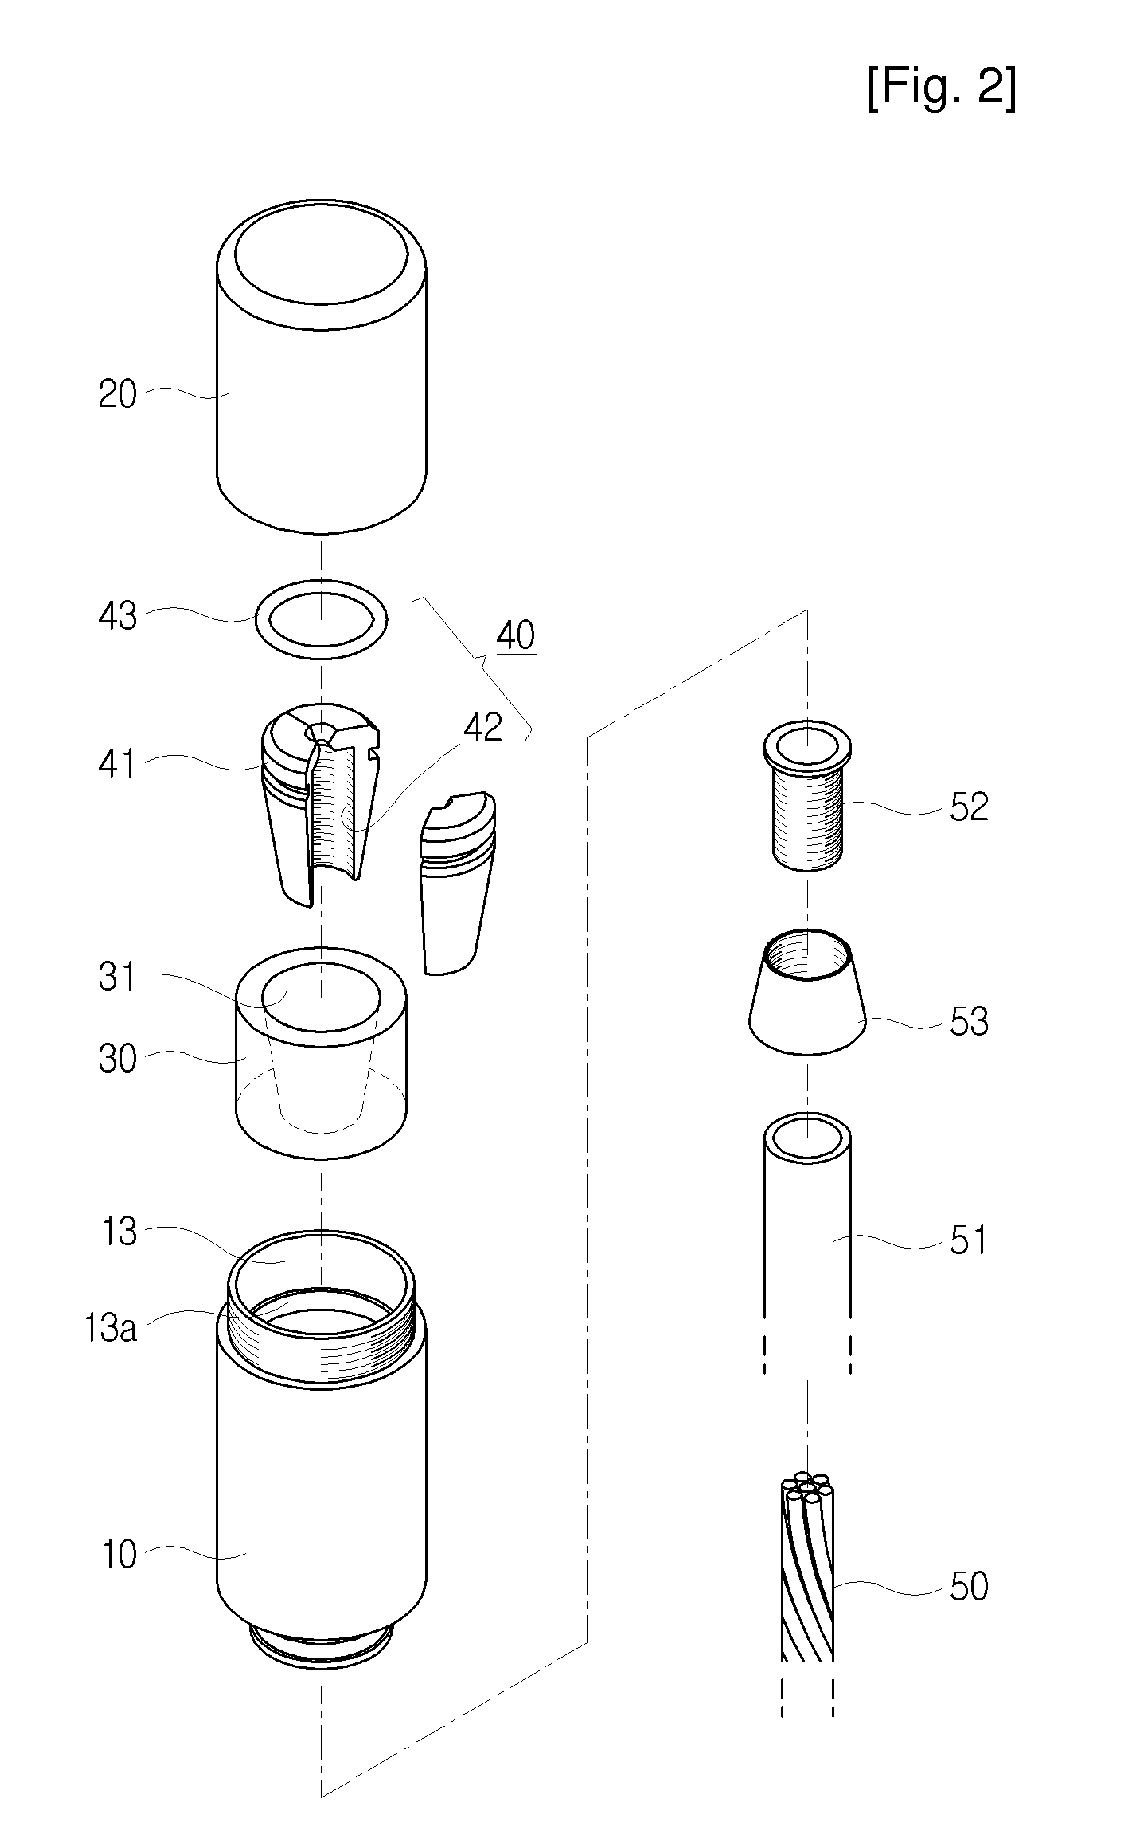 Internal Fixer For Anchor Having Releasable Tensioning Steel Wire